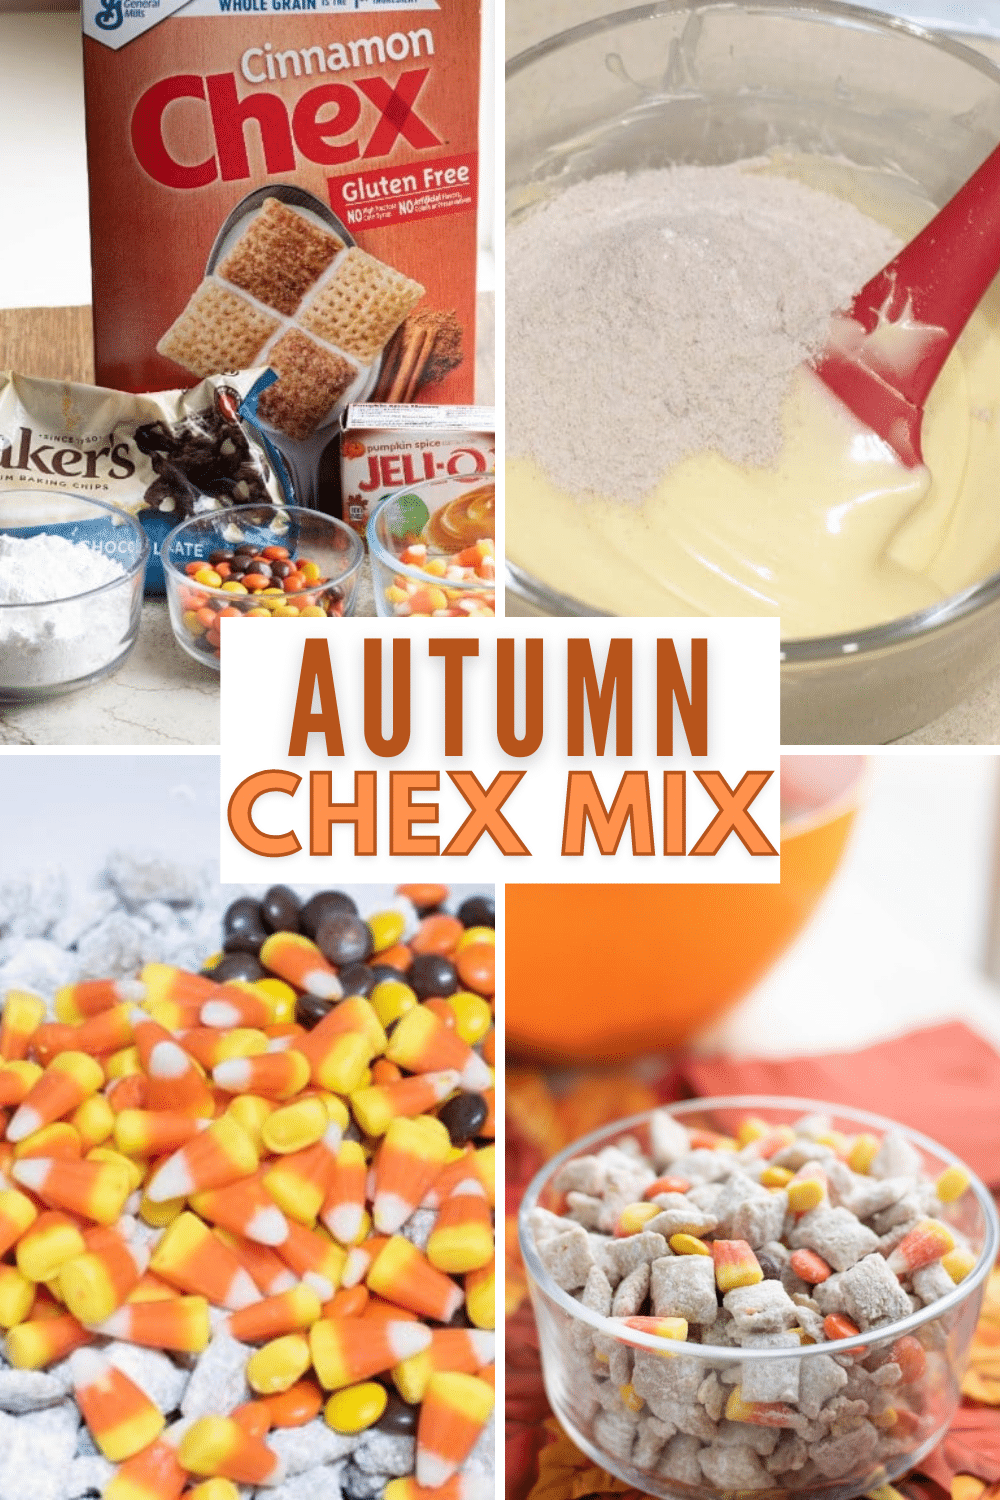 This Autumn Chex Mix is perfect for Fall parties! Just like Muddy Buddies, but with Fall colors from candy. #Fall #chexmix #muddybuddies #candycorn via @wondermomwannab